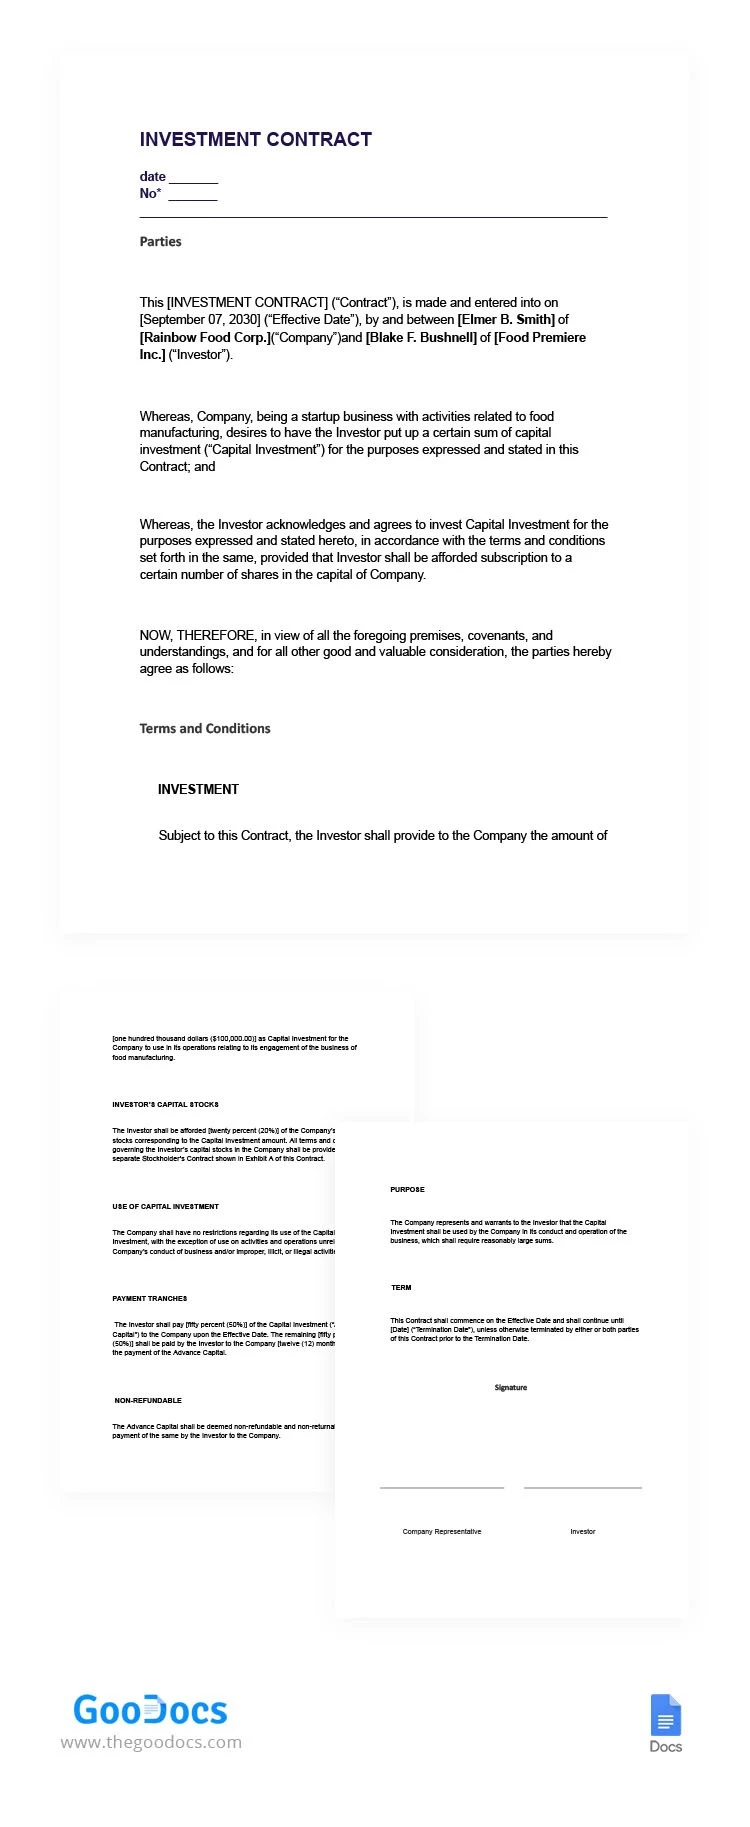 Іnvestment Contract - free Google Docs Template - 10066024